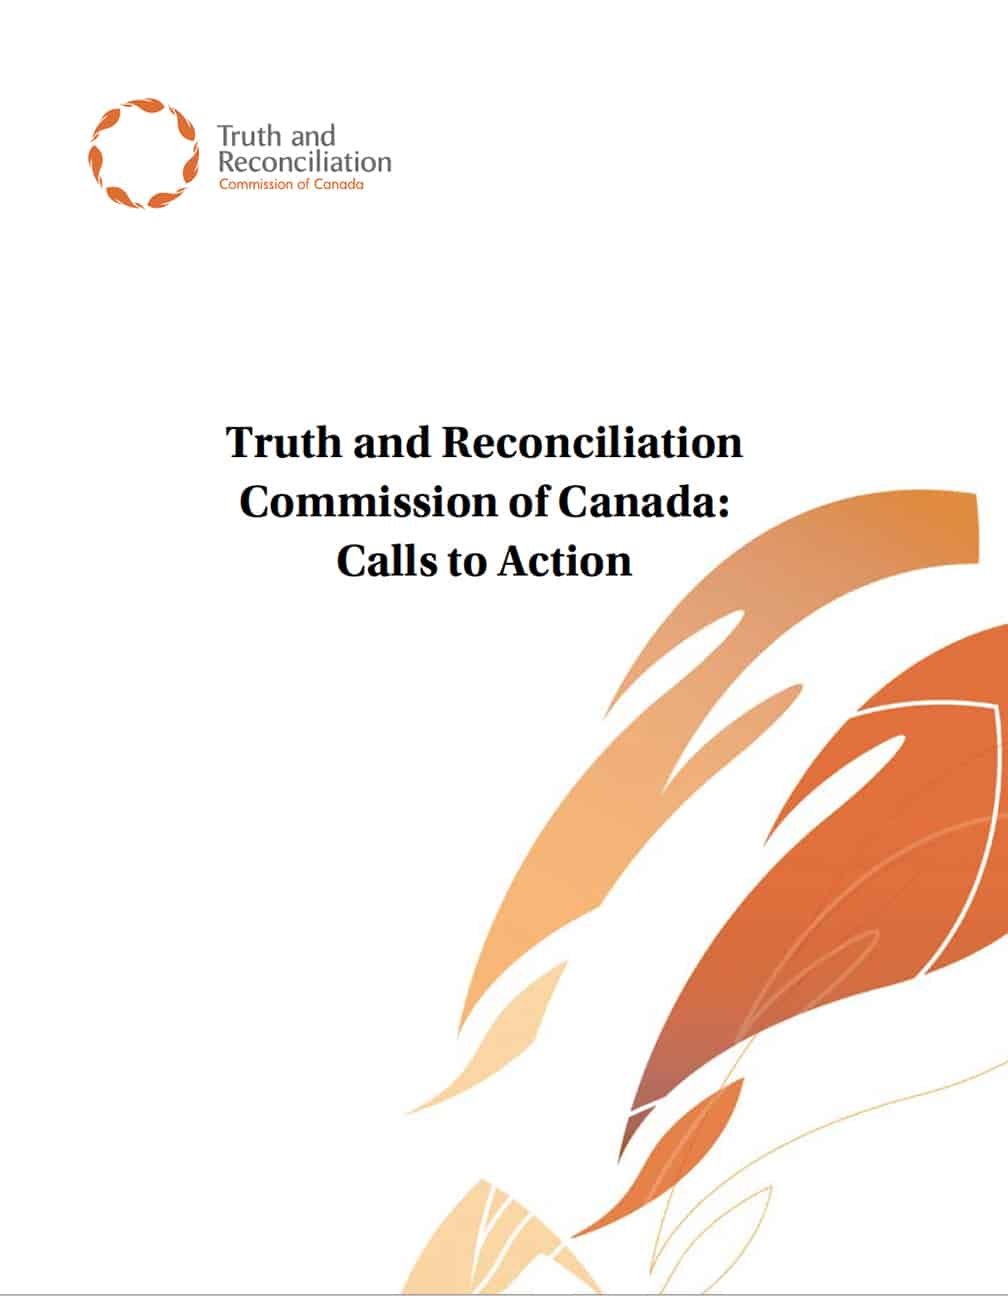 CA_2015_Truth_Reconciliation_Calls_to_Action.jpg